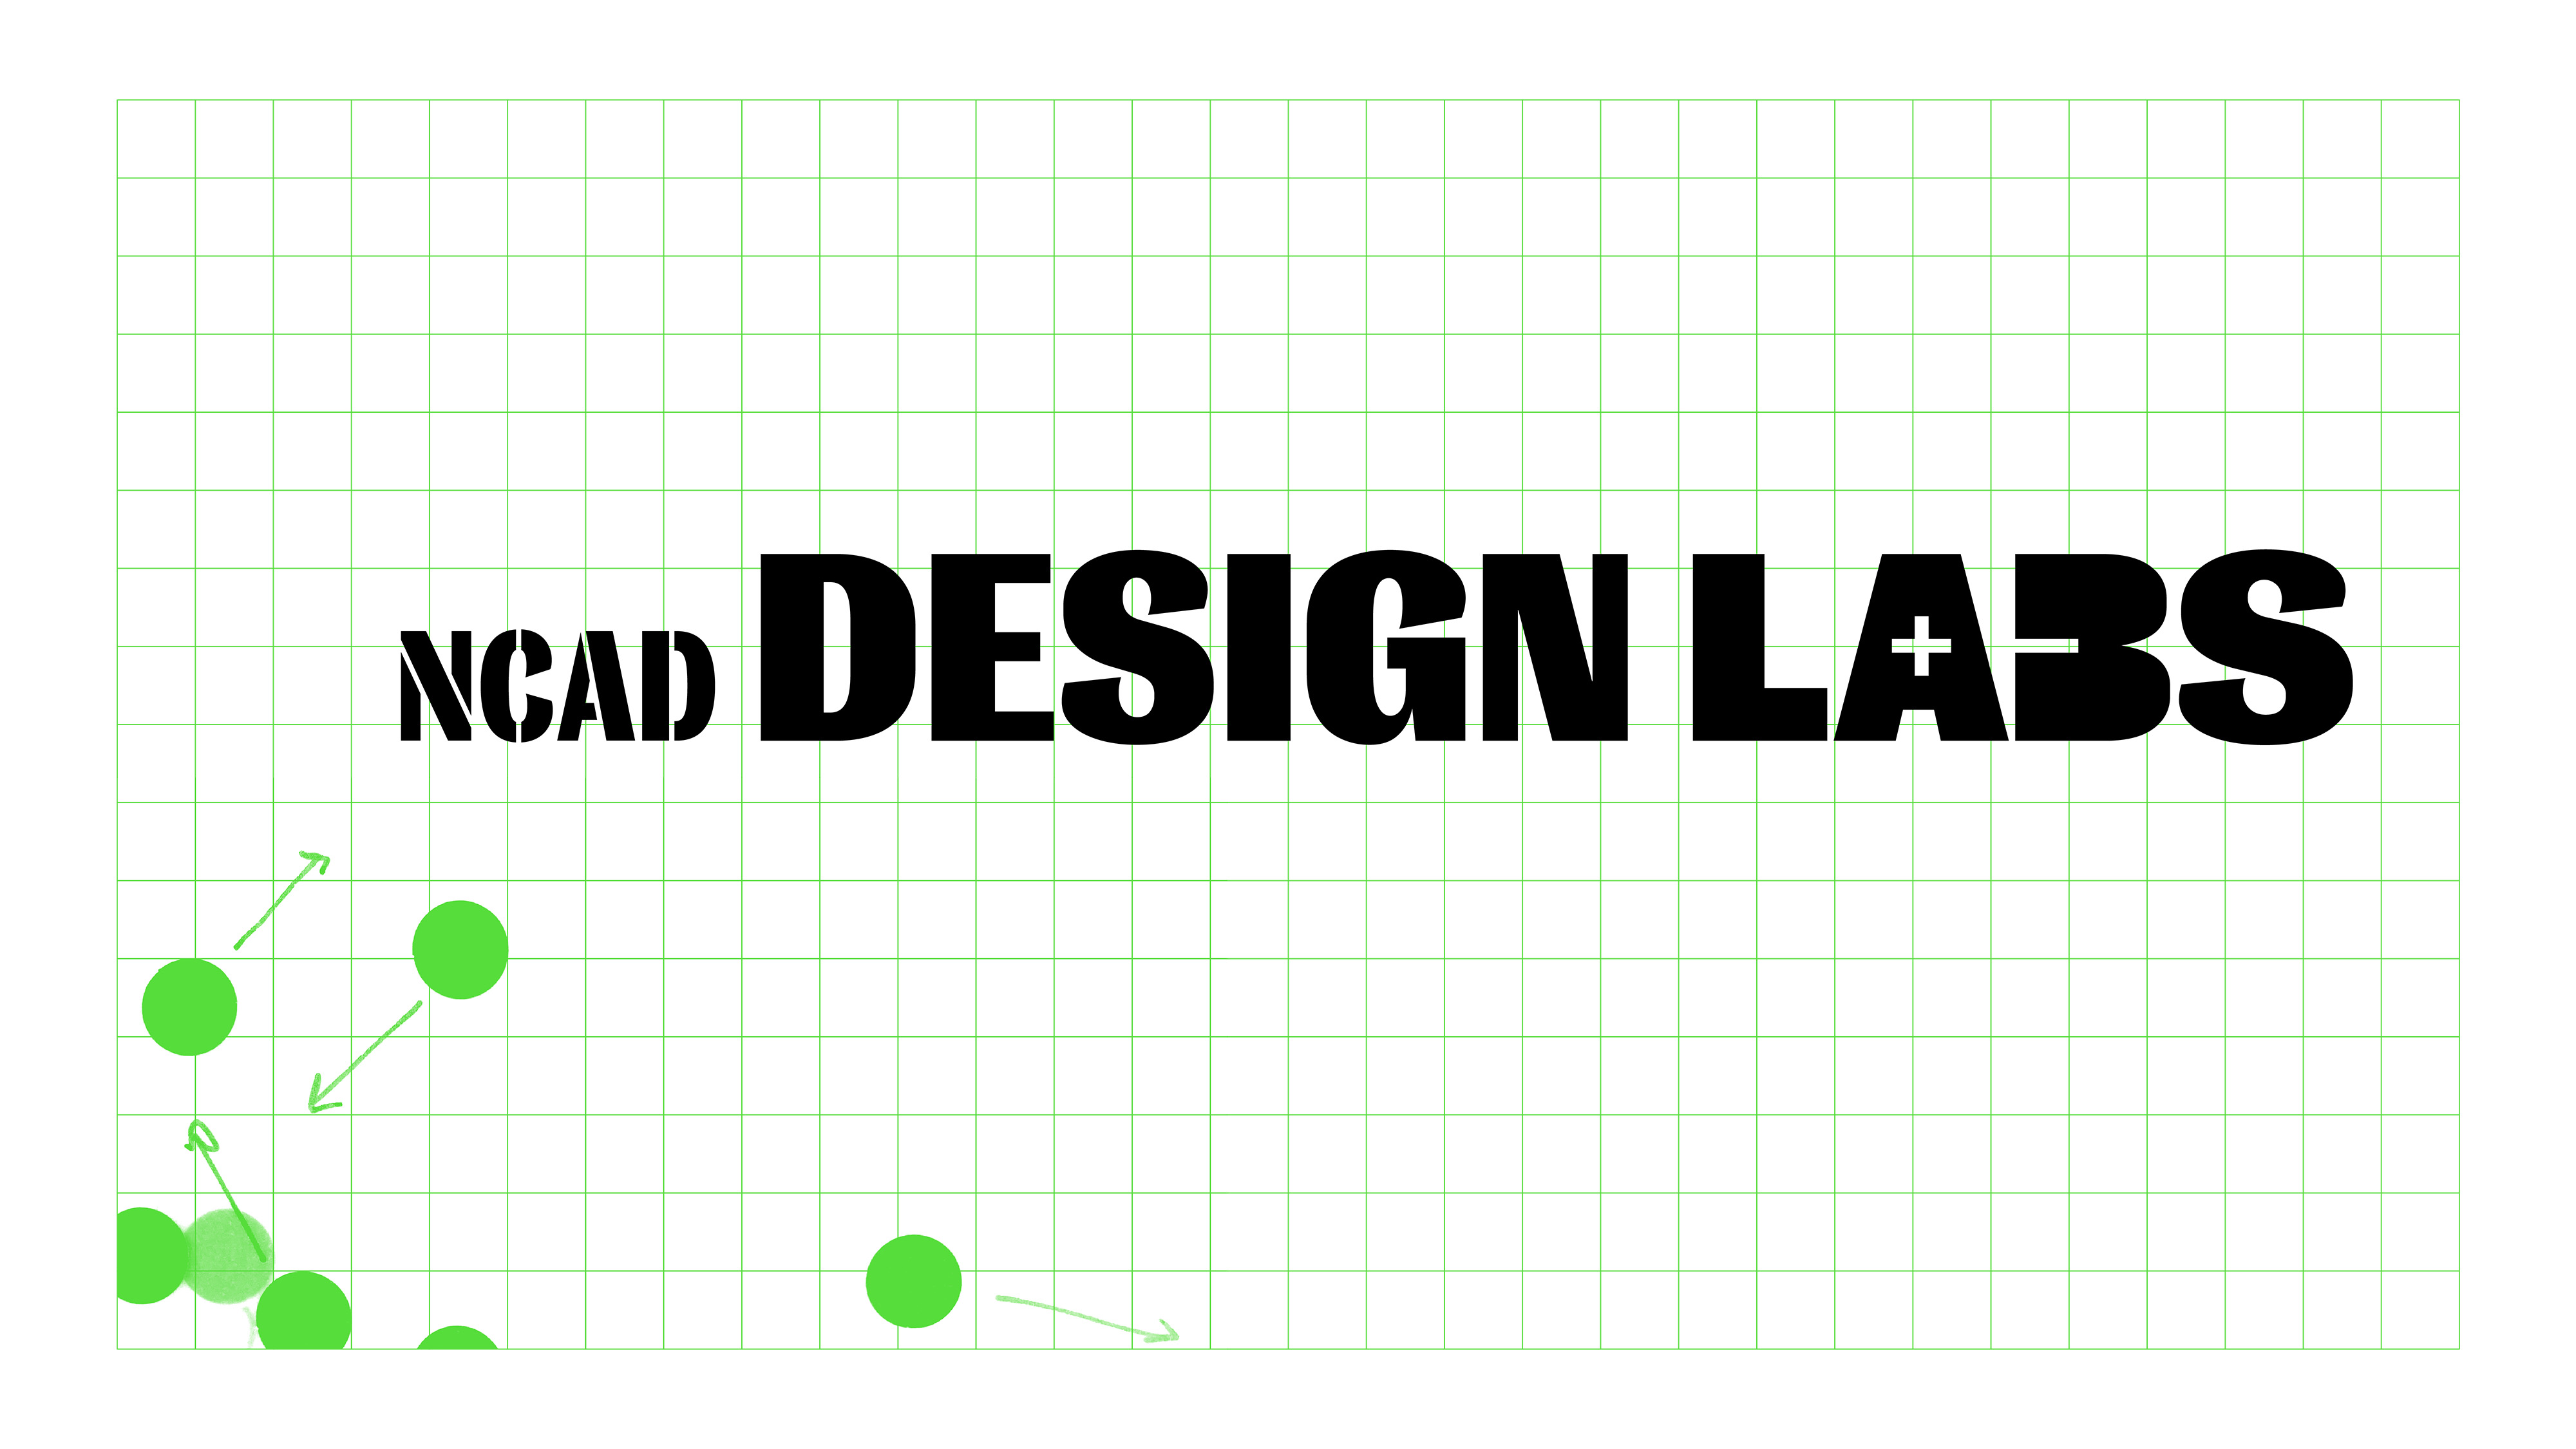 NCAD DesignLabs. Funding of €6.8 million announced for sustainable disruptive technology